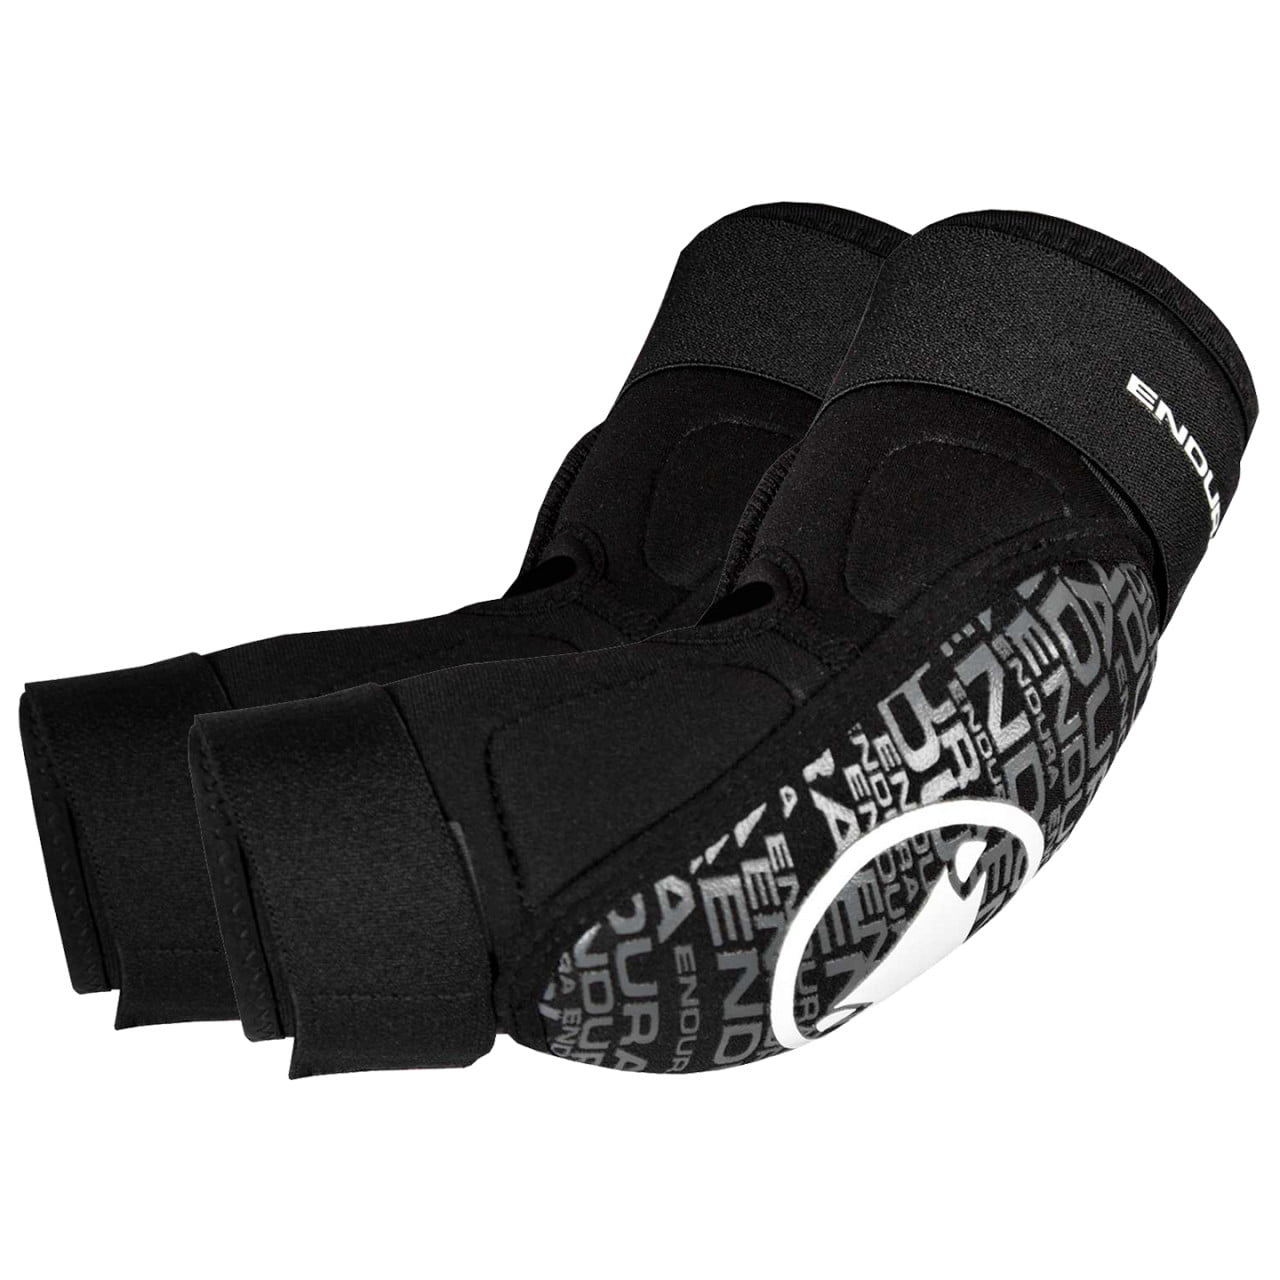 Singletrack Elbow Protectors for Youngsters